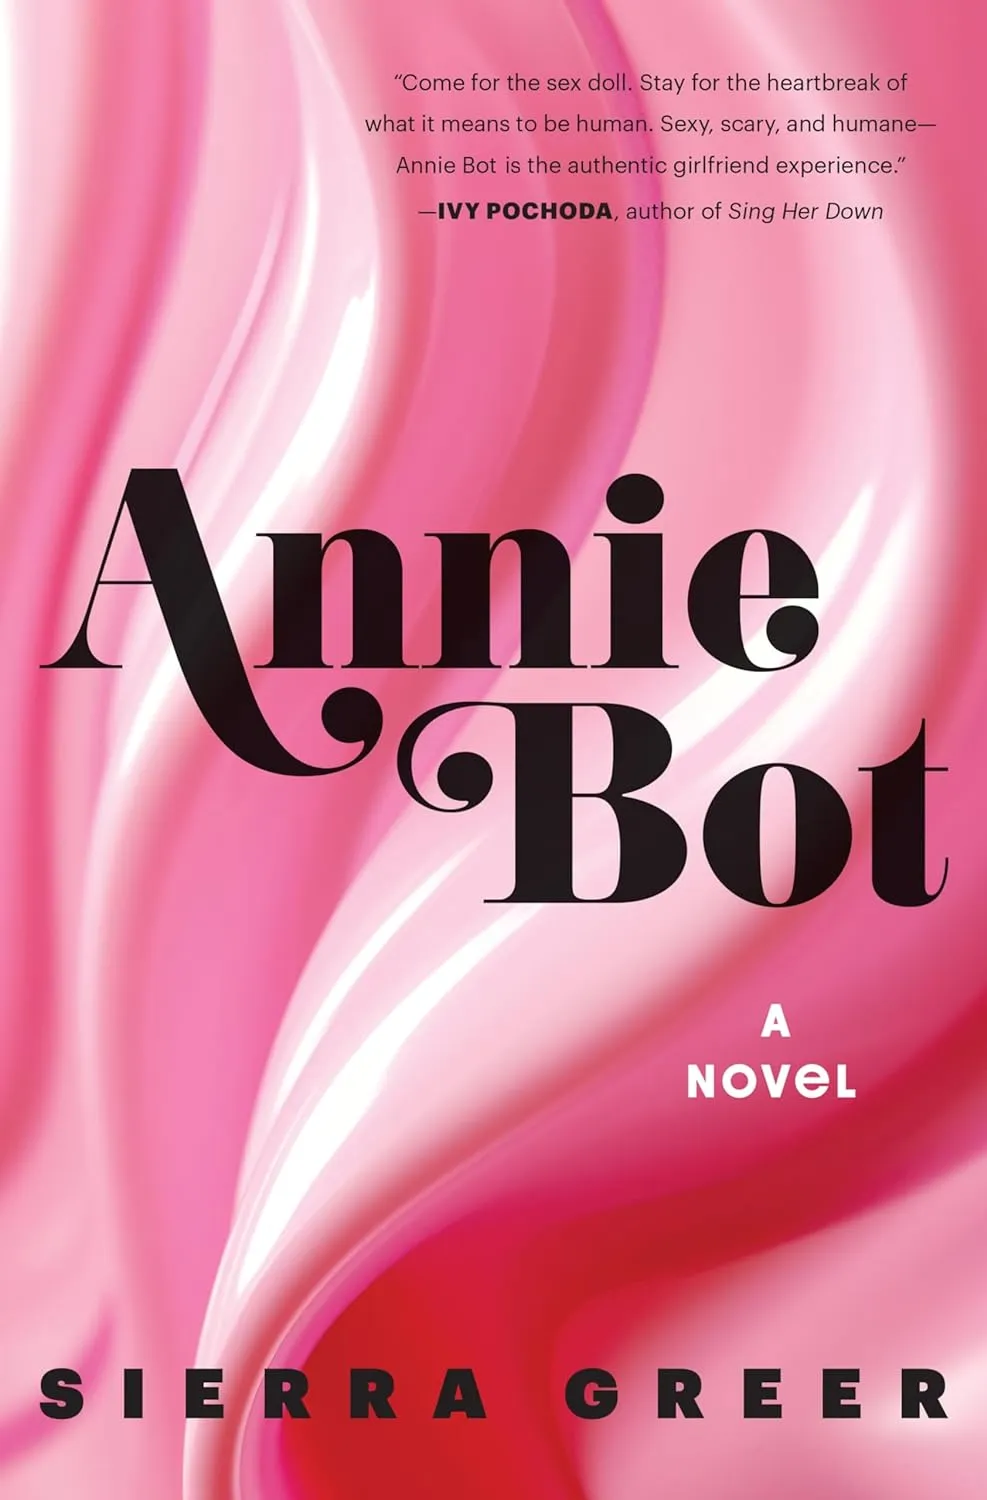 “Annie Bot” is My Kind of Cuddle Bunny